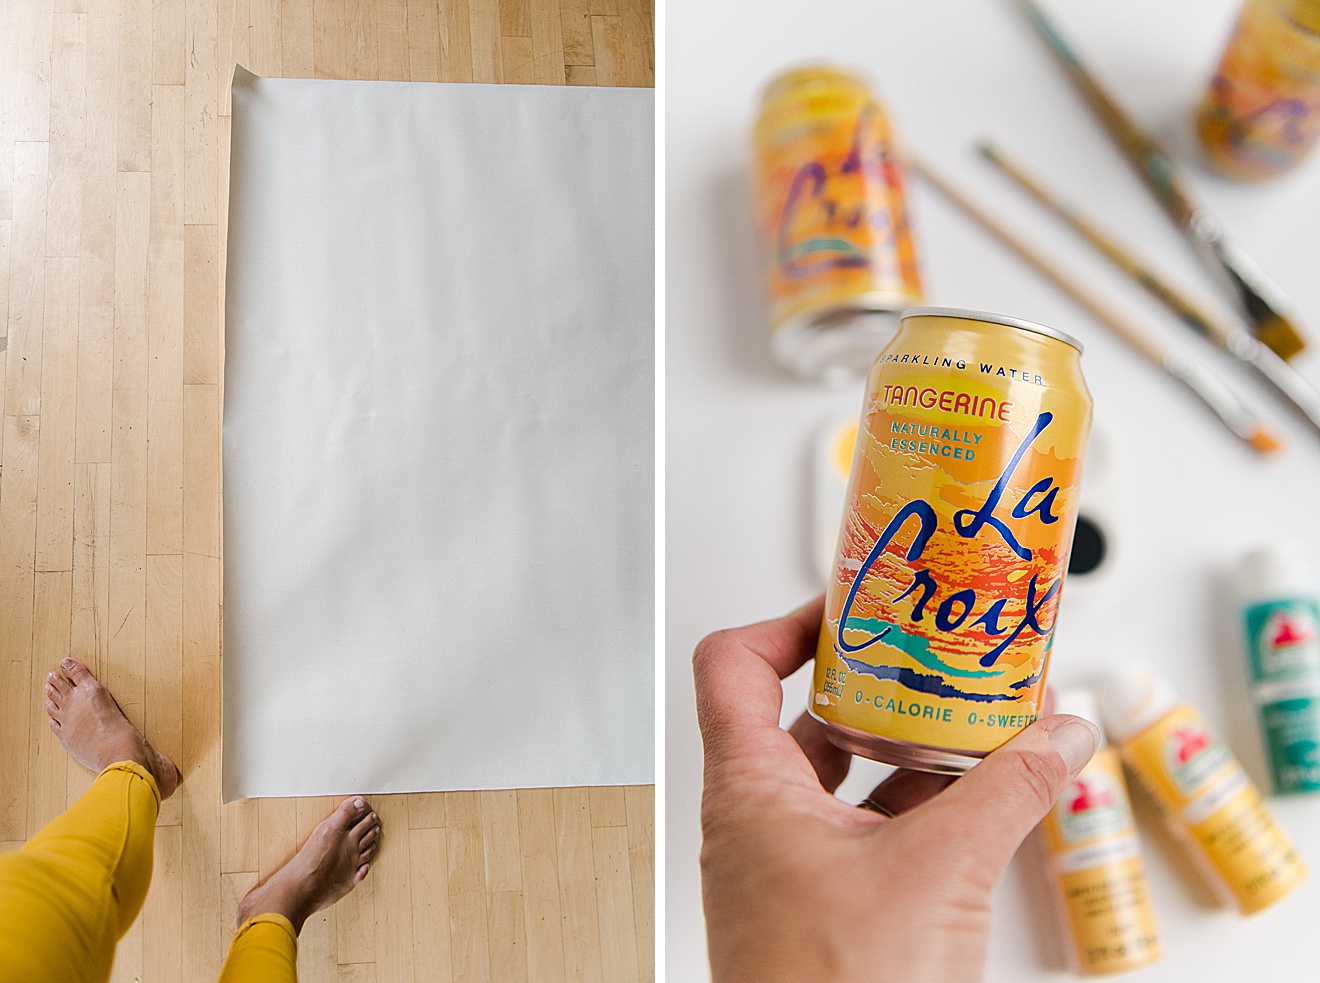 LaCroix costume DIY, LaCroix can costume, How to make a LaCroix costume, halloween costume ideas, How to make a LaCroix costume for Halloween